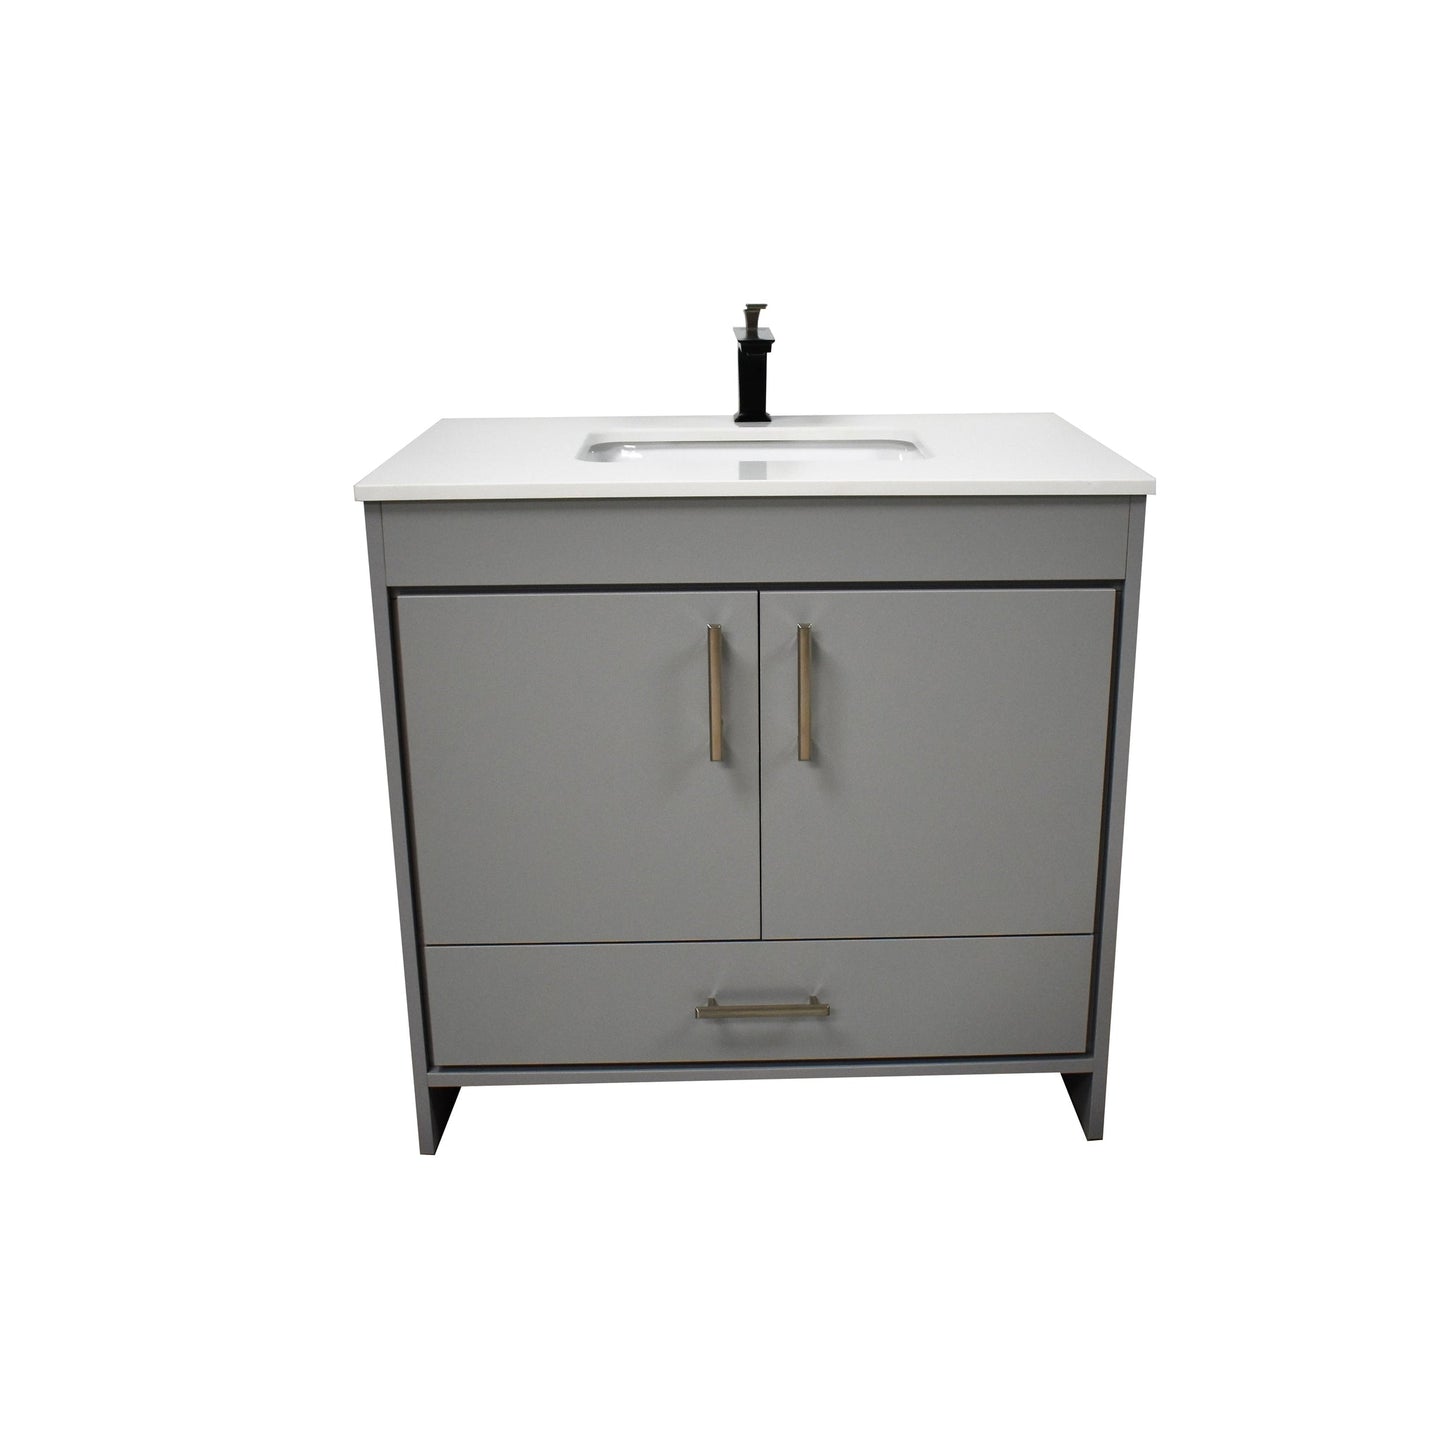 Volpa USA Capri 36" x 22" Gray Freestanding Modern Bathroom Vanity With Preinstalled Undermount Sink And White Microstone Top With Brushed Nickel Edge Handles